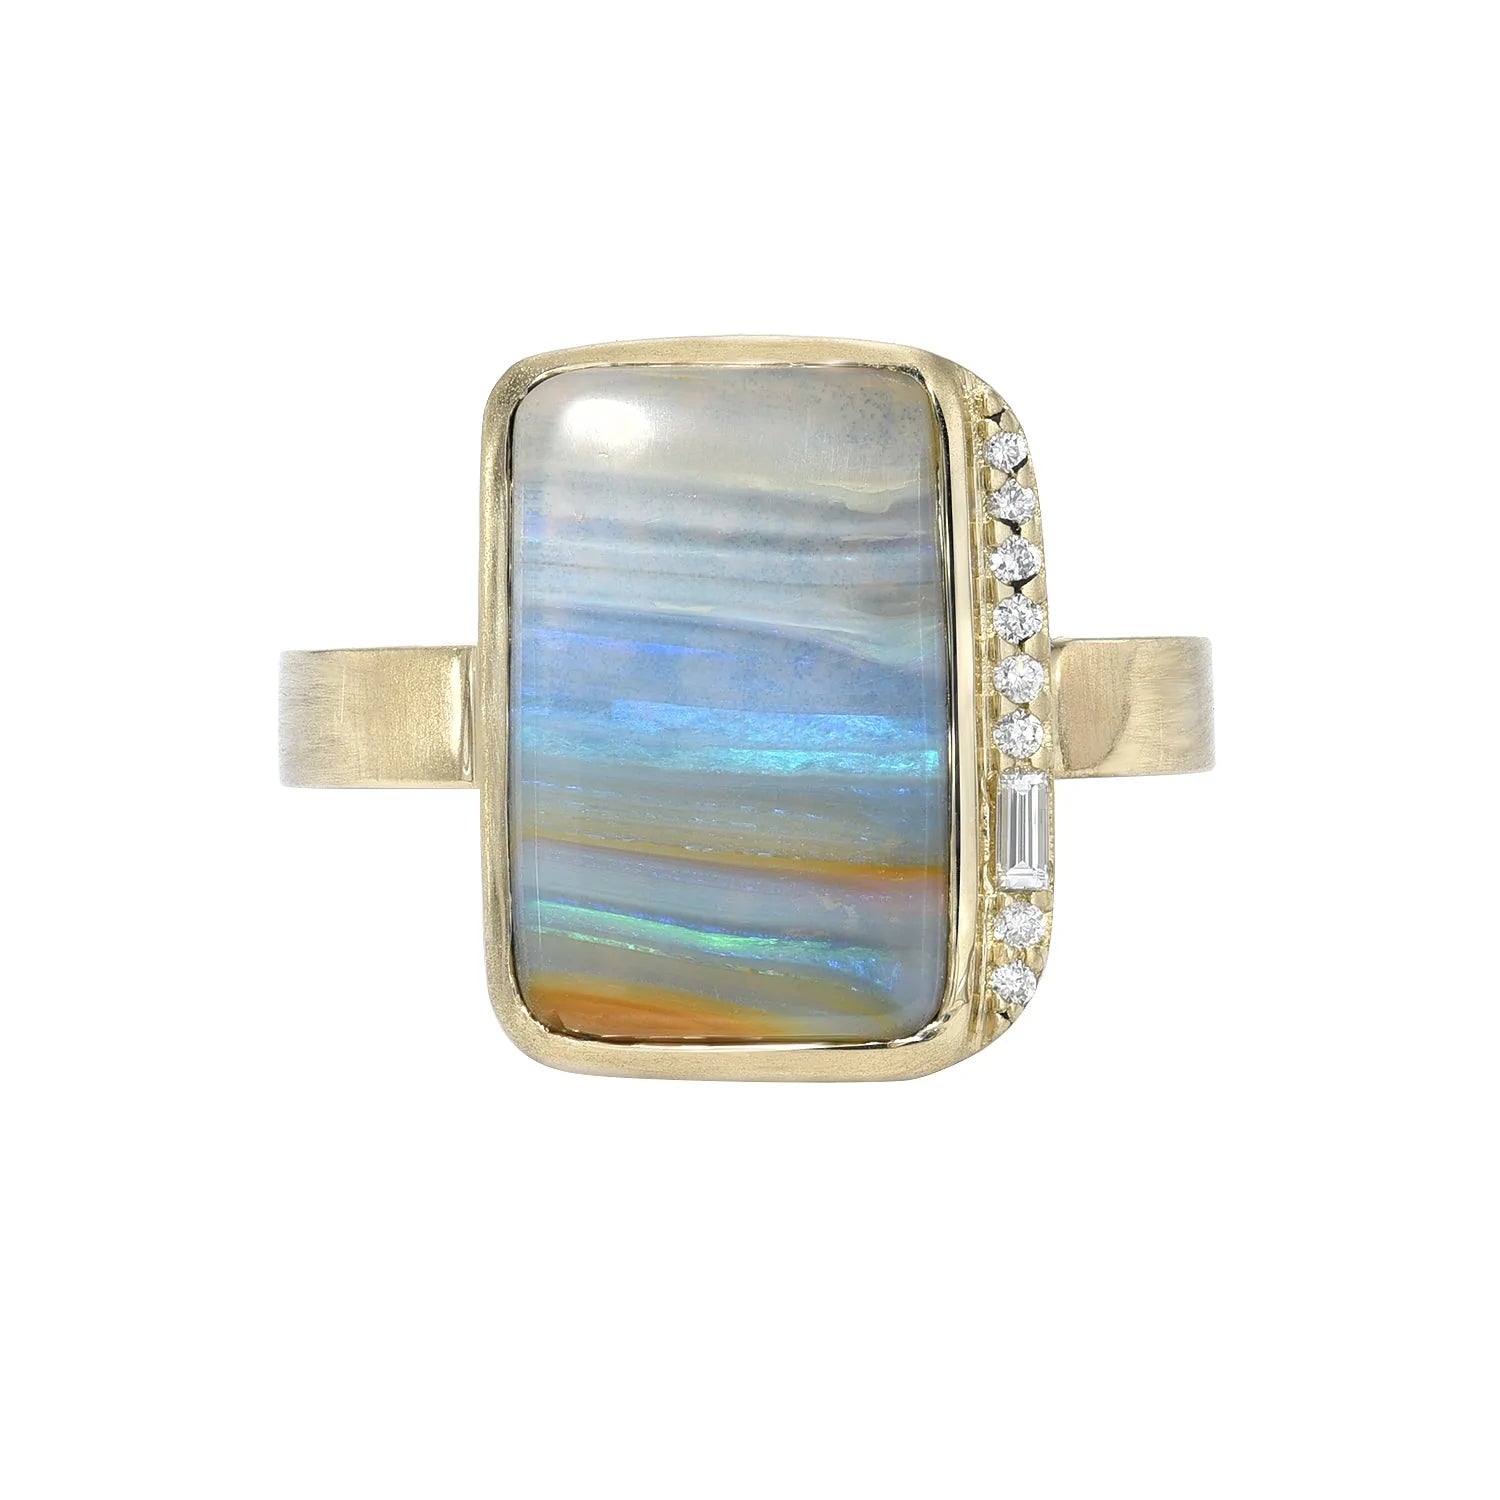 An Australian Opal Ring by NIXIN Jewelry with a blue opal shot in front of a white backdrop.